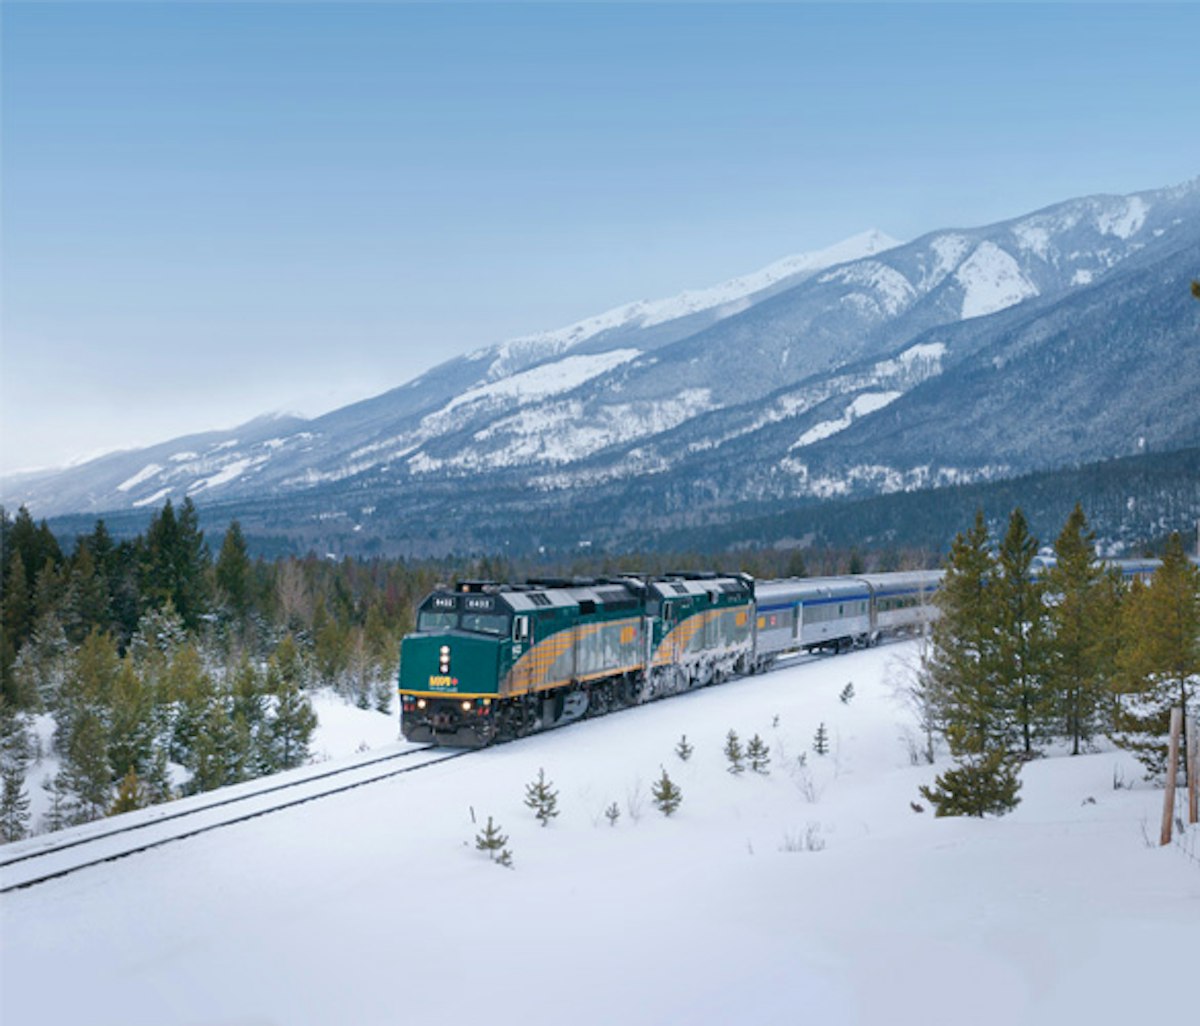 A passenger train travels through a snowy landscape with mountains in the background.